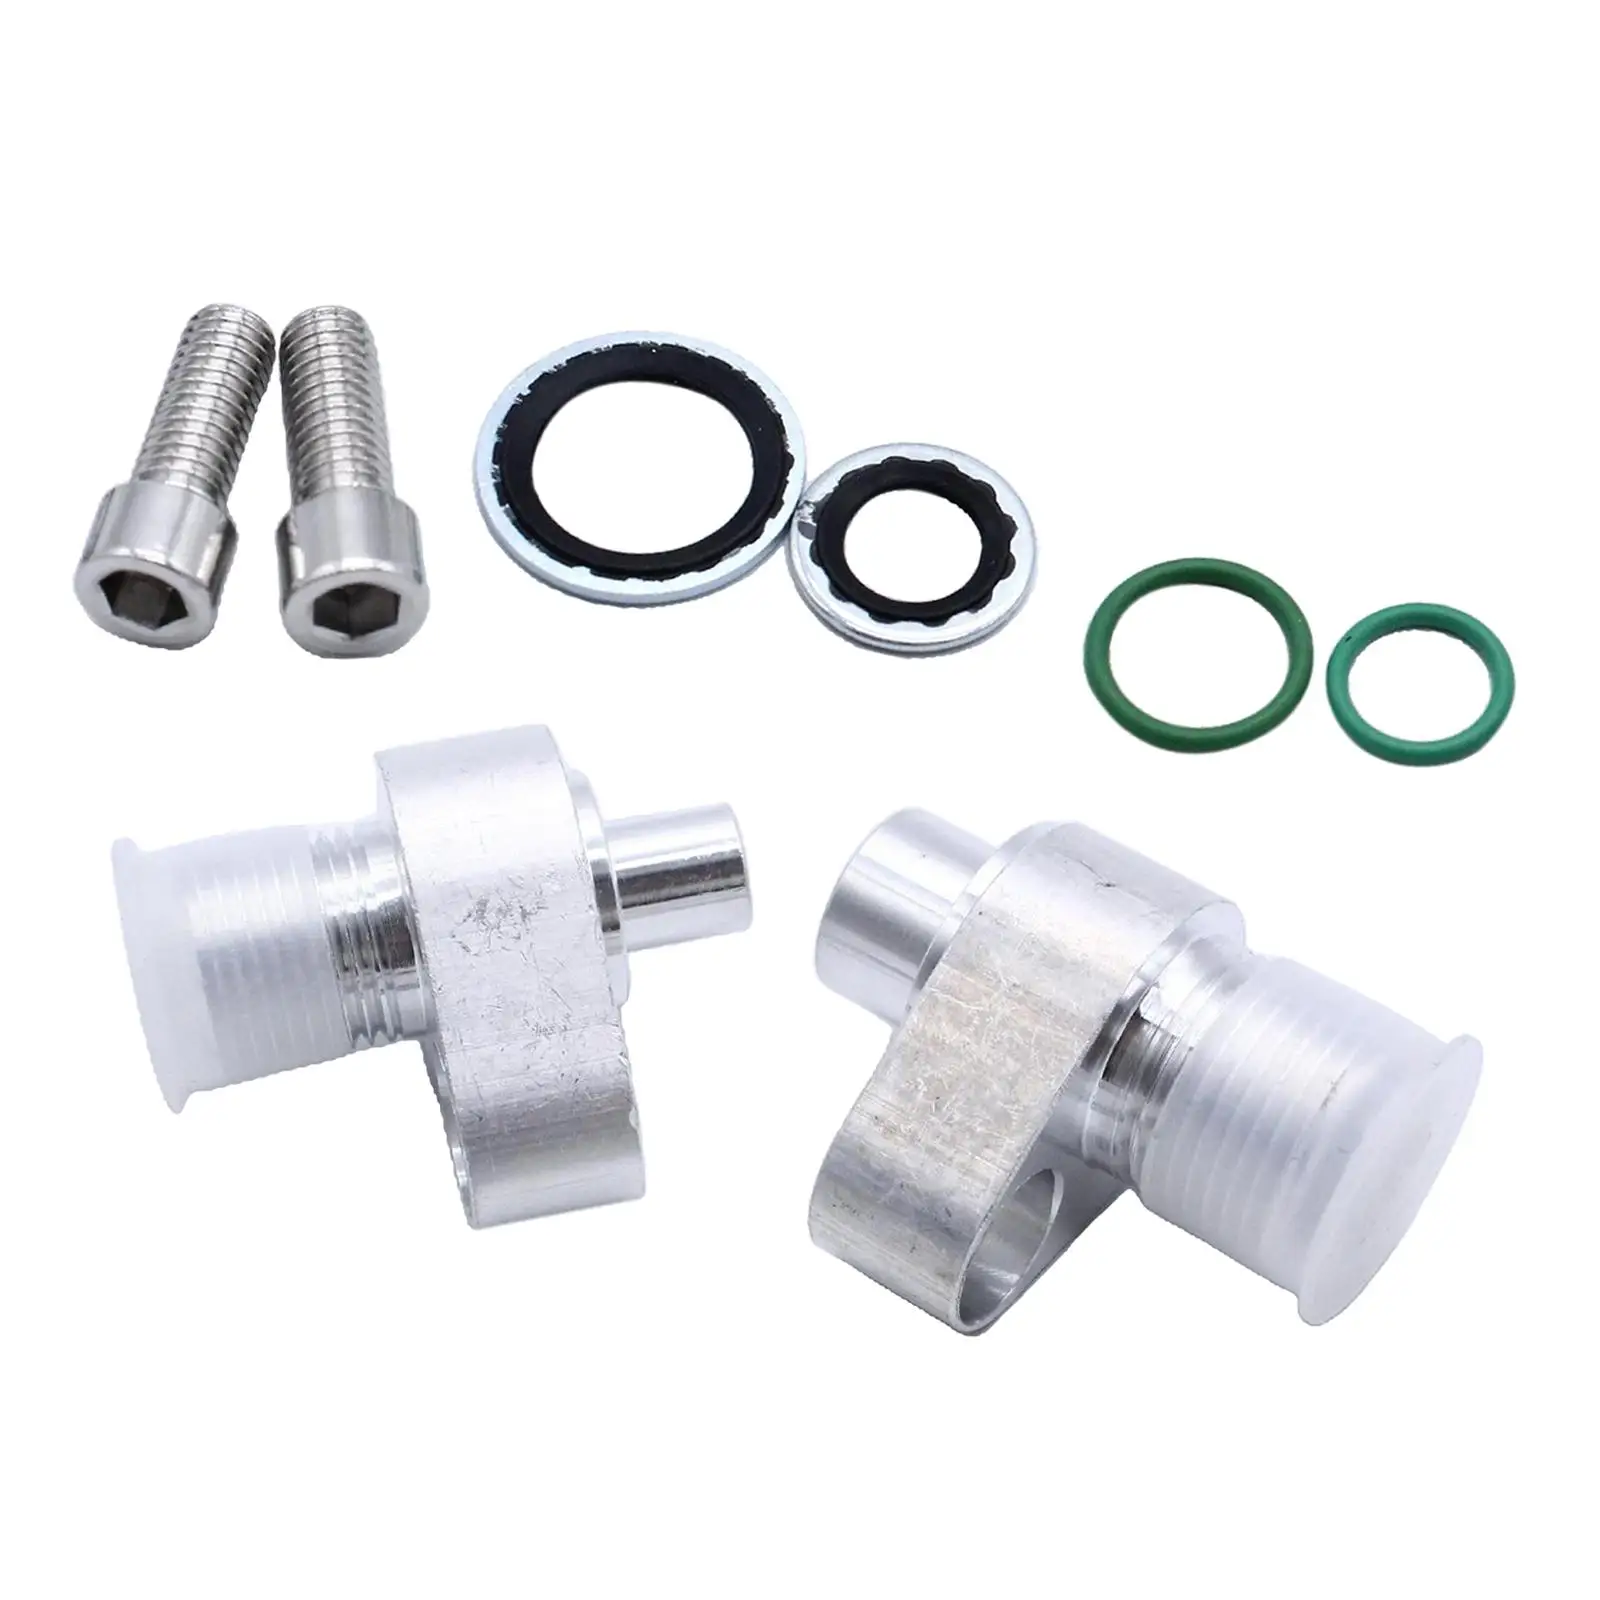 451-1105 440-822 DS345061 440-823 cessories Parts 451-1106 W10 Compressor Connector Adapter Fittings 0S20F 10S17F